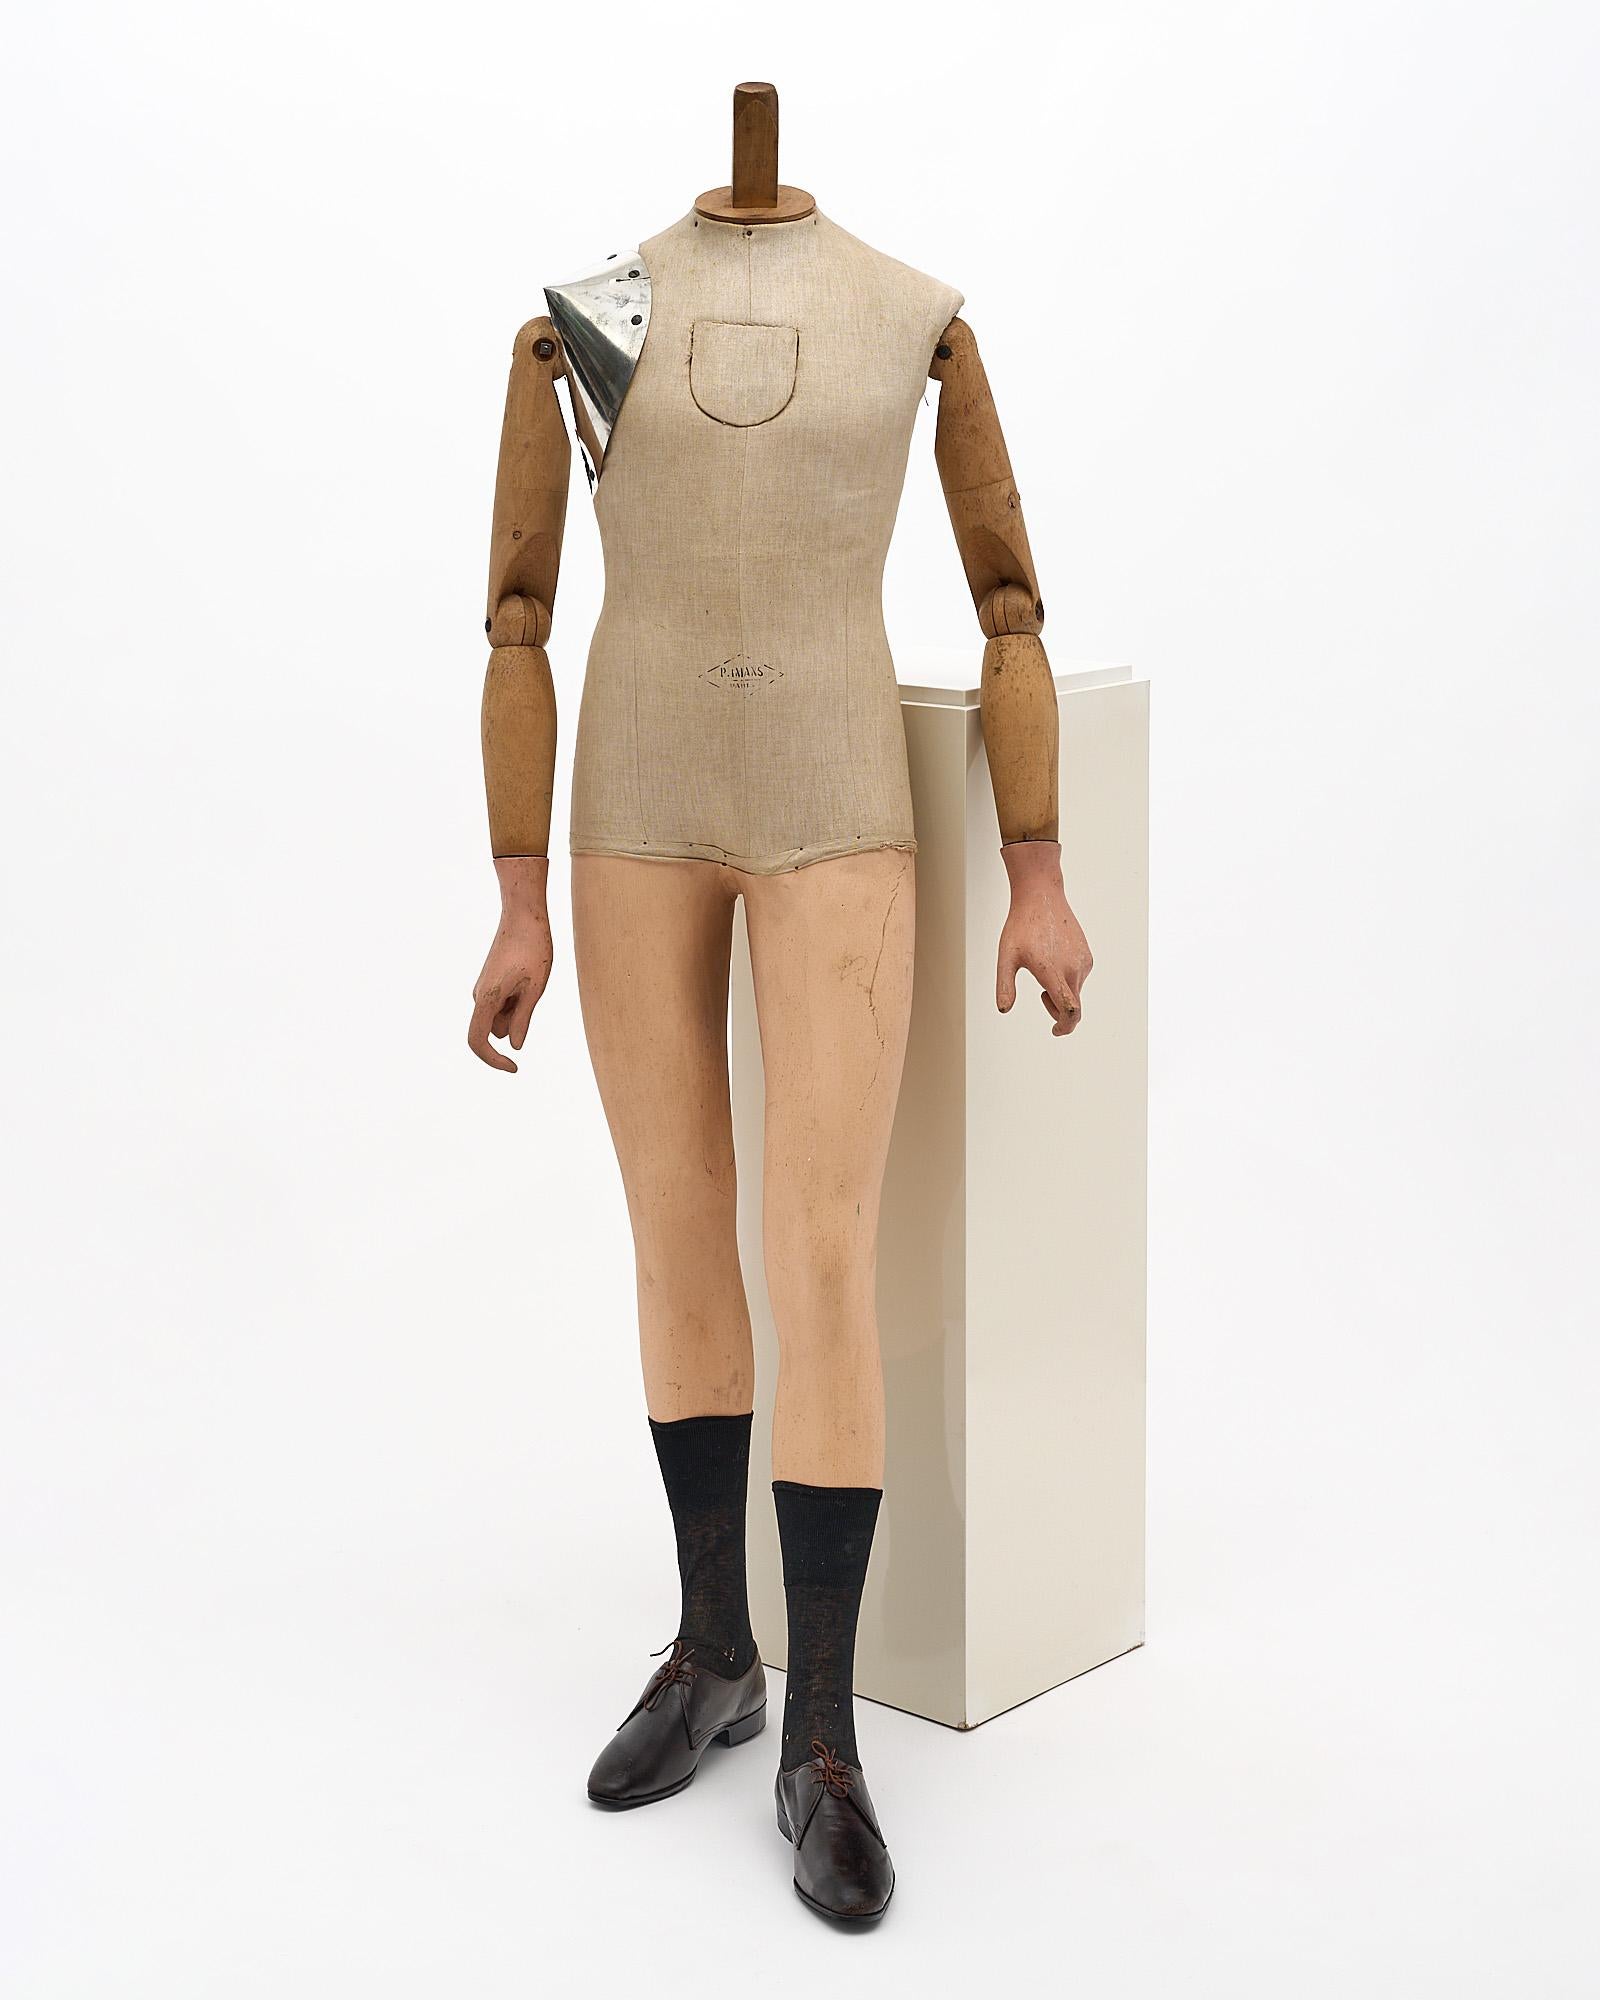 Mannequin Art Déco, by Pierre Imans France circa 1930. This is a very rare male mannequin by famous fashion mannequin manufacturer Pierre Imans. Made out of hand carved wood and linen, the mannequin features also a metal plate on the shoulder and